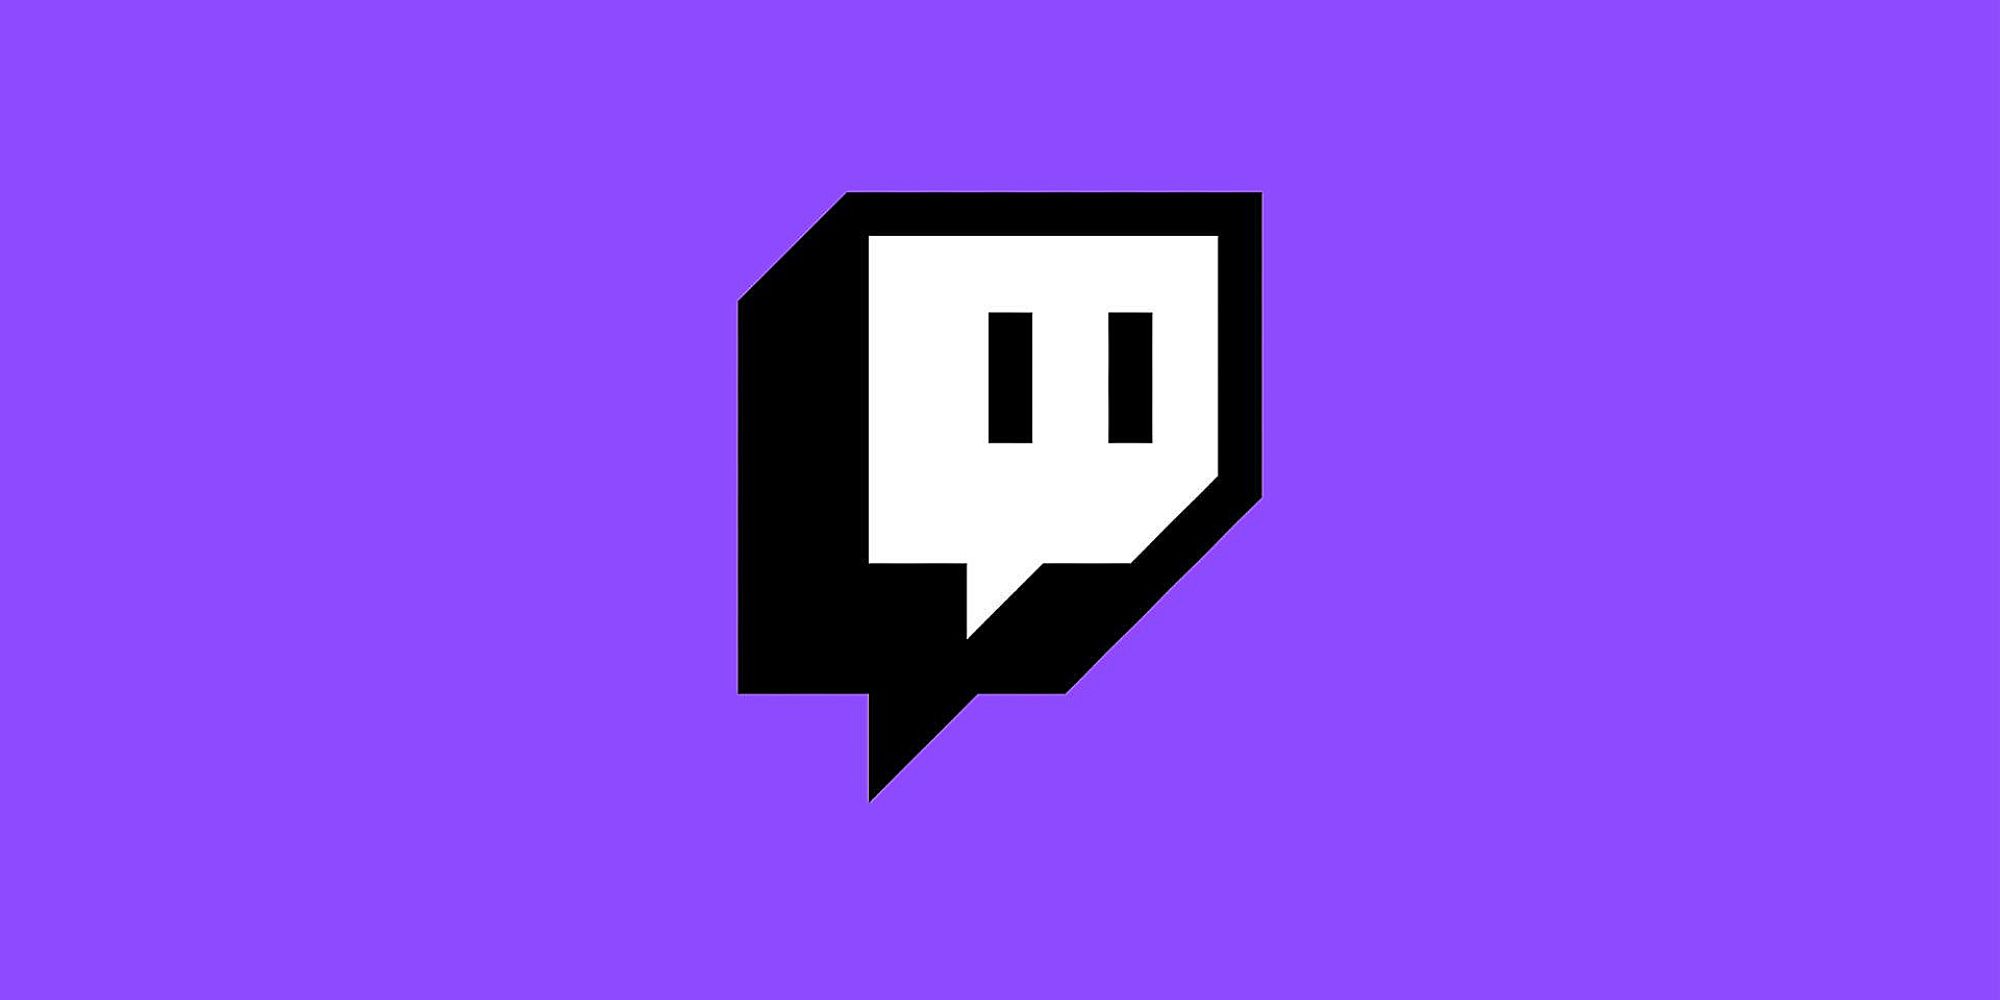 Twitch Lays Off More Than 400 Workers, CEO Emmett Shear Steps Down